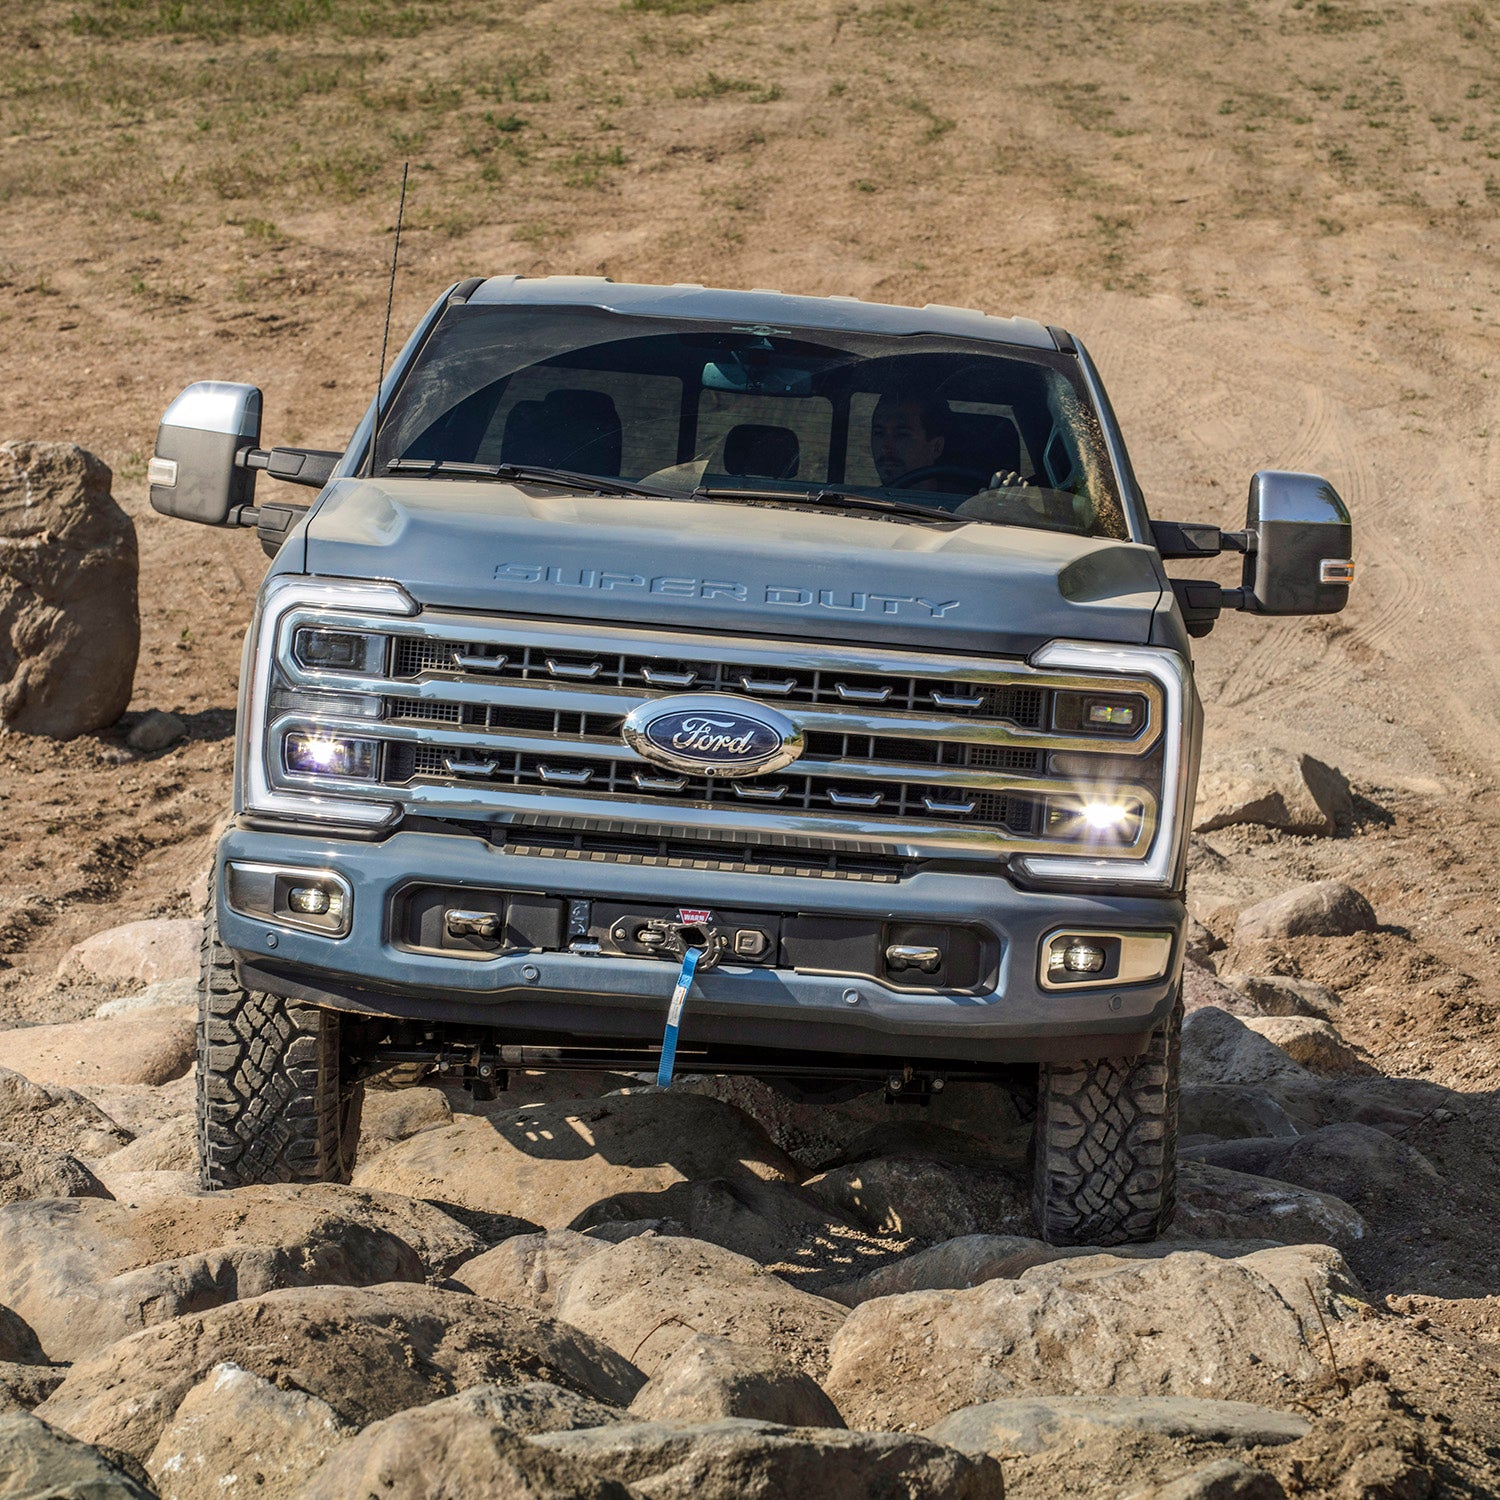 Best Trucks and SUVs Under $20,000 for Off-Road and Overlanding